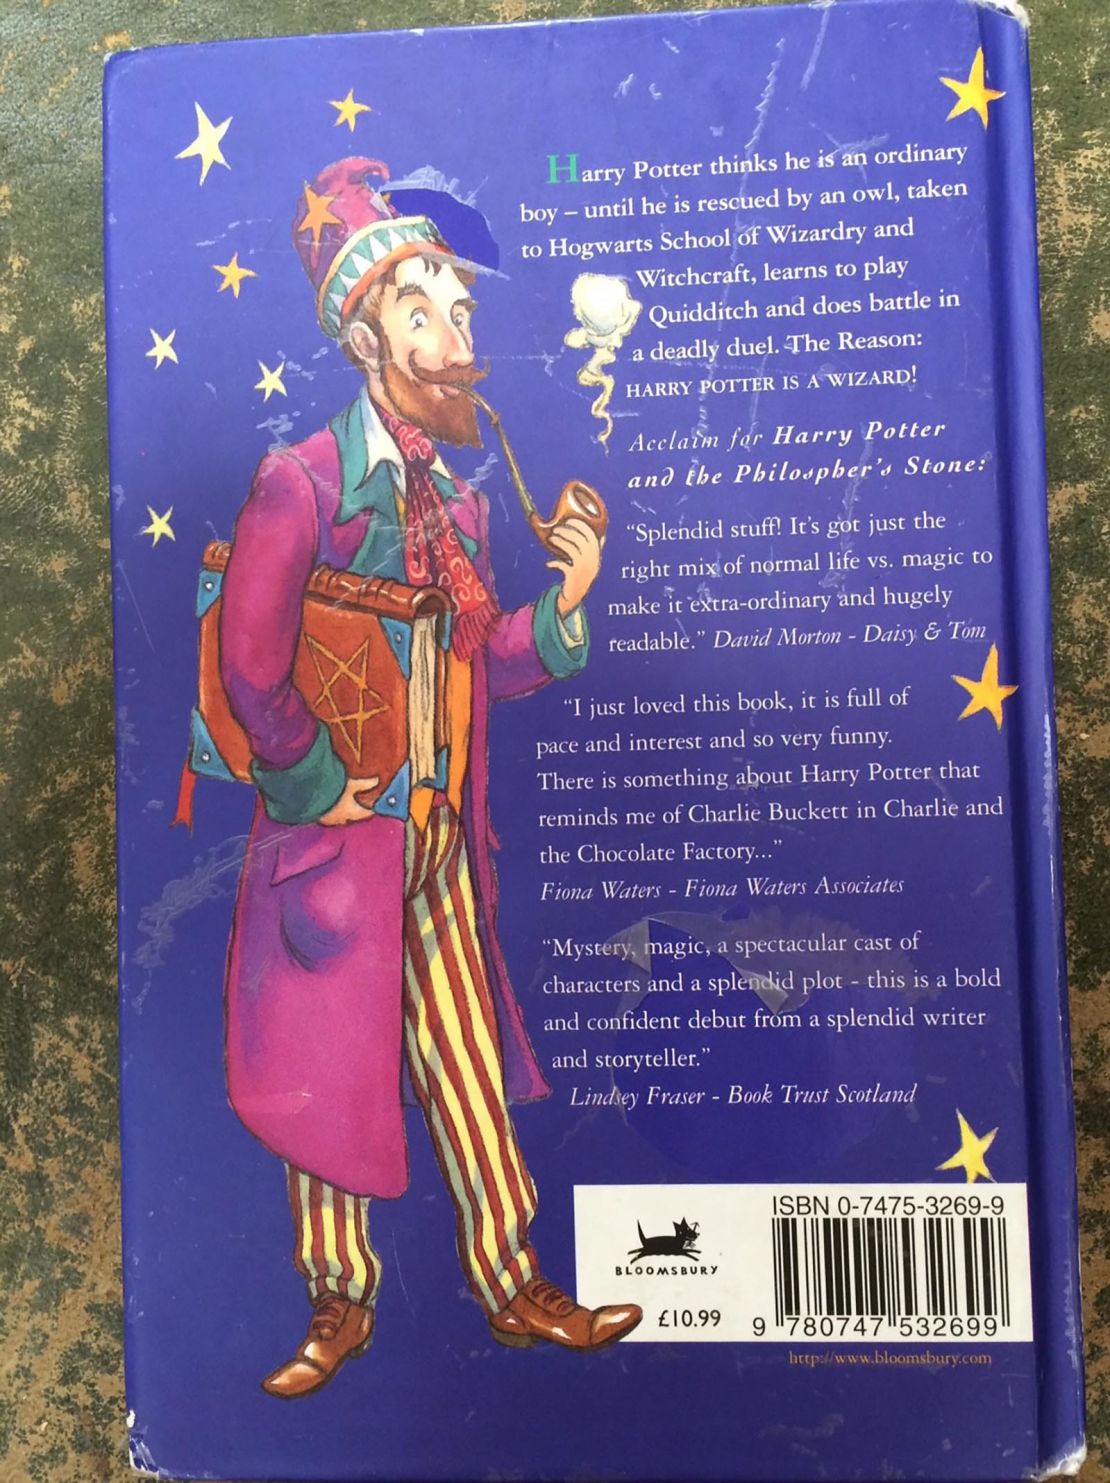 The misspelling of "philosopher" on the back cover is unique to the first print run.